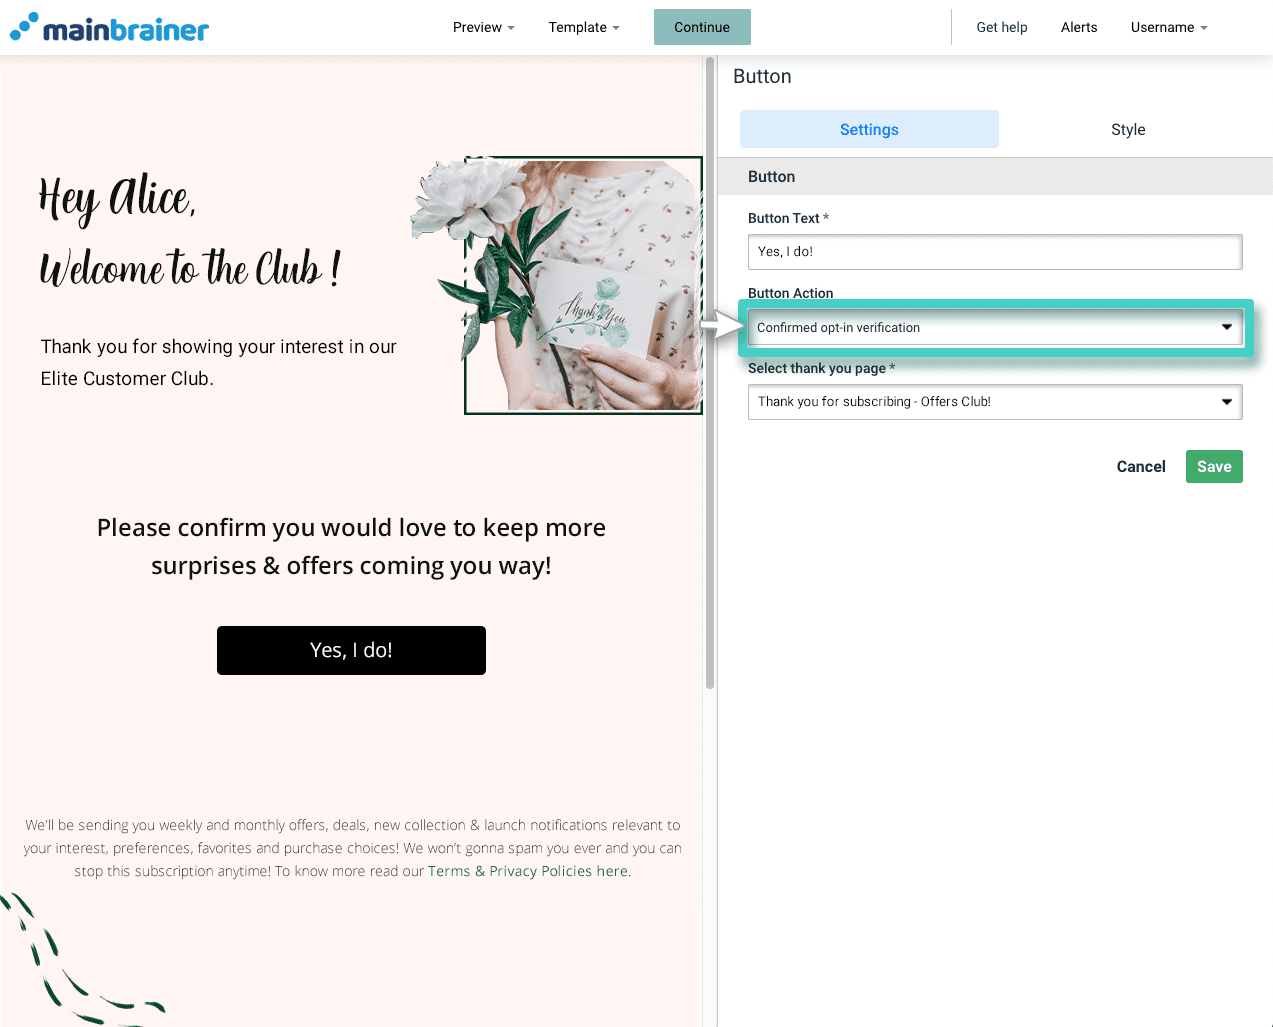 Double opt in SMS sign ups, button settings. Button action field highlighted